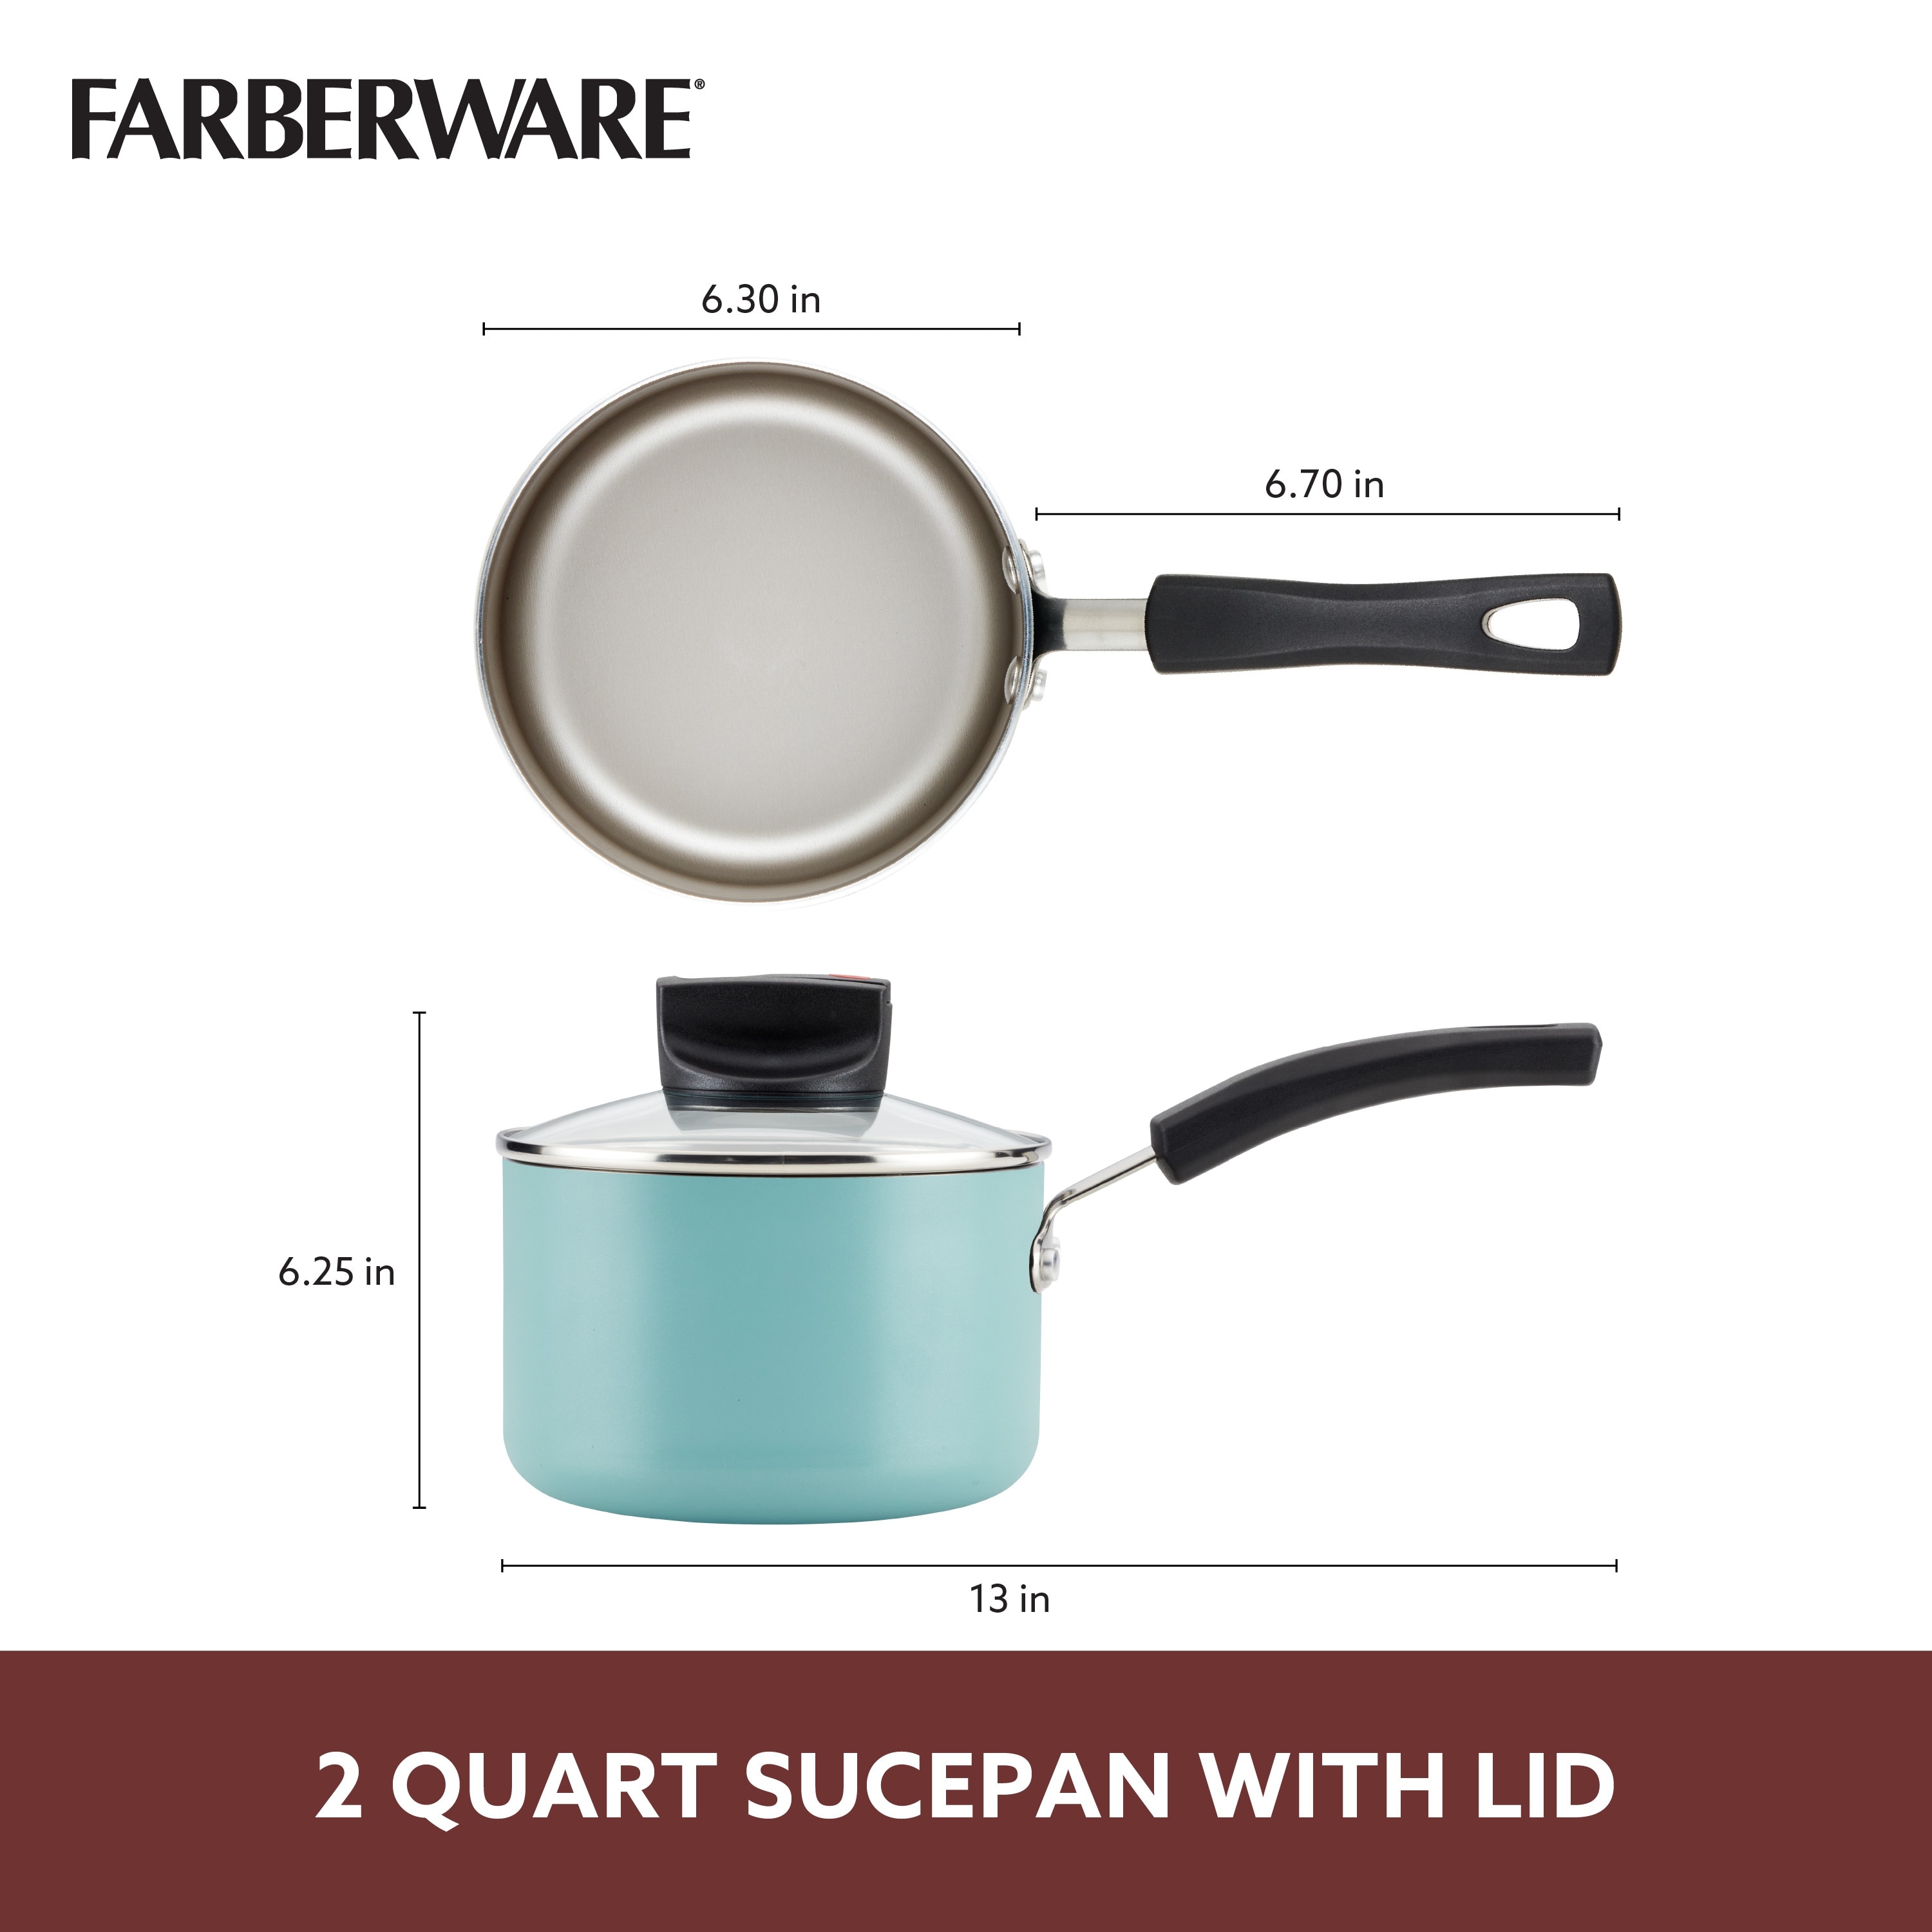 https://ak1.ostkcdn.com/images/products/is/images/direct/f1bbb164c4bf17651c0a086218572a47843154bc/Farberware-Smart-Control-Aluminum-Nonstick-Sauce-Pan-with-Lid%2C-2-Quart.jpg